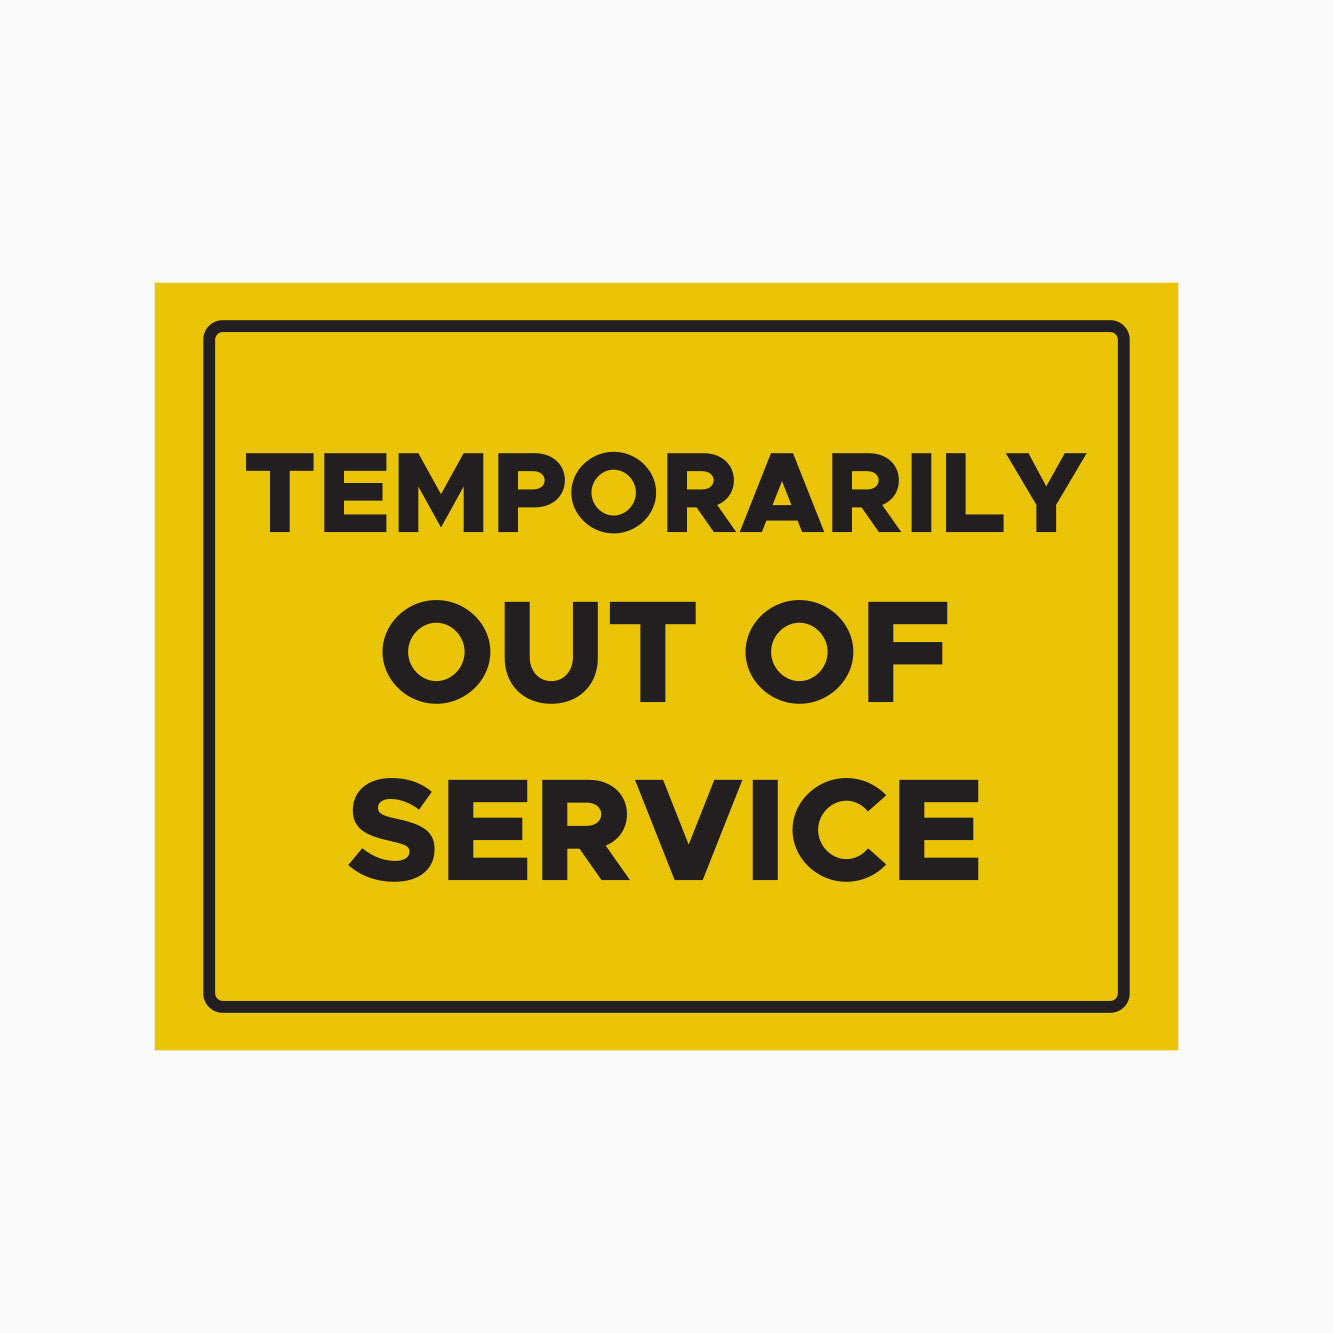 TEMPORARILY OUT OF SERVICE SIGN